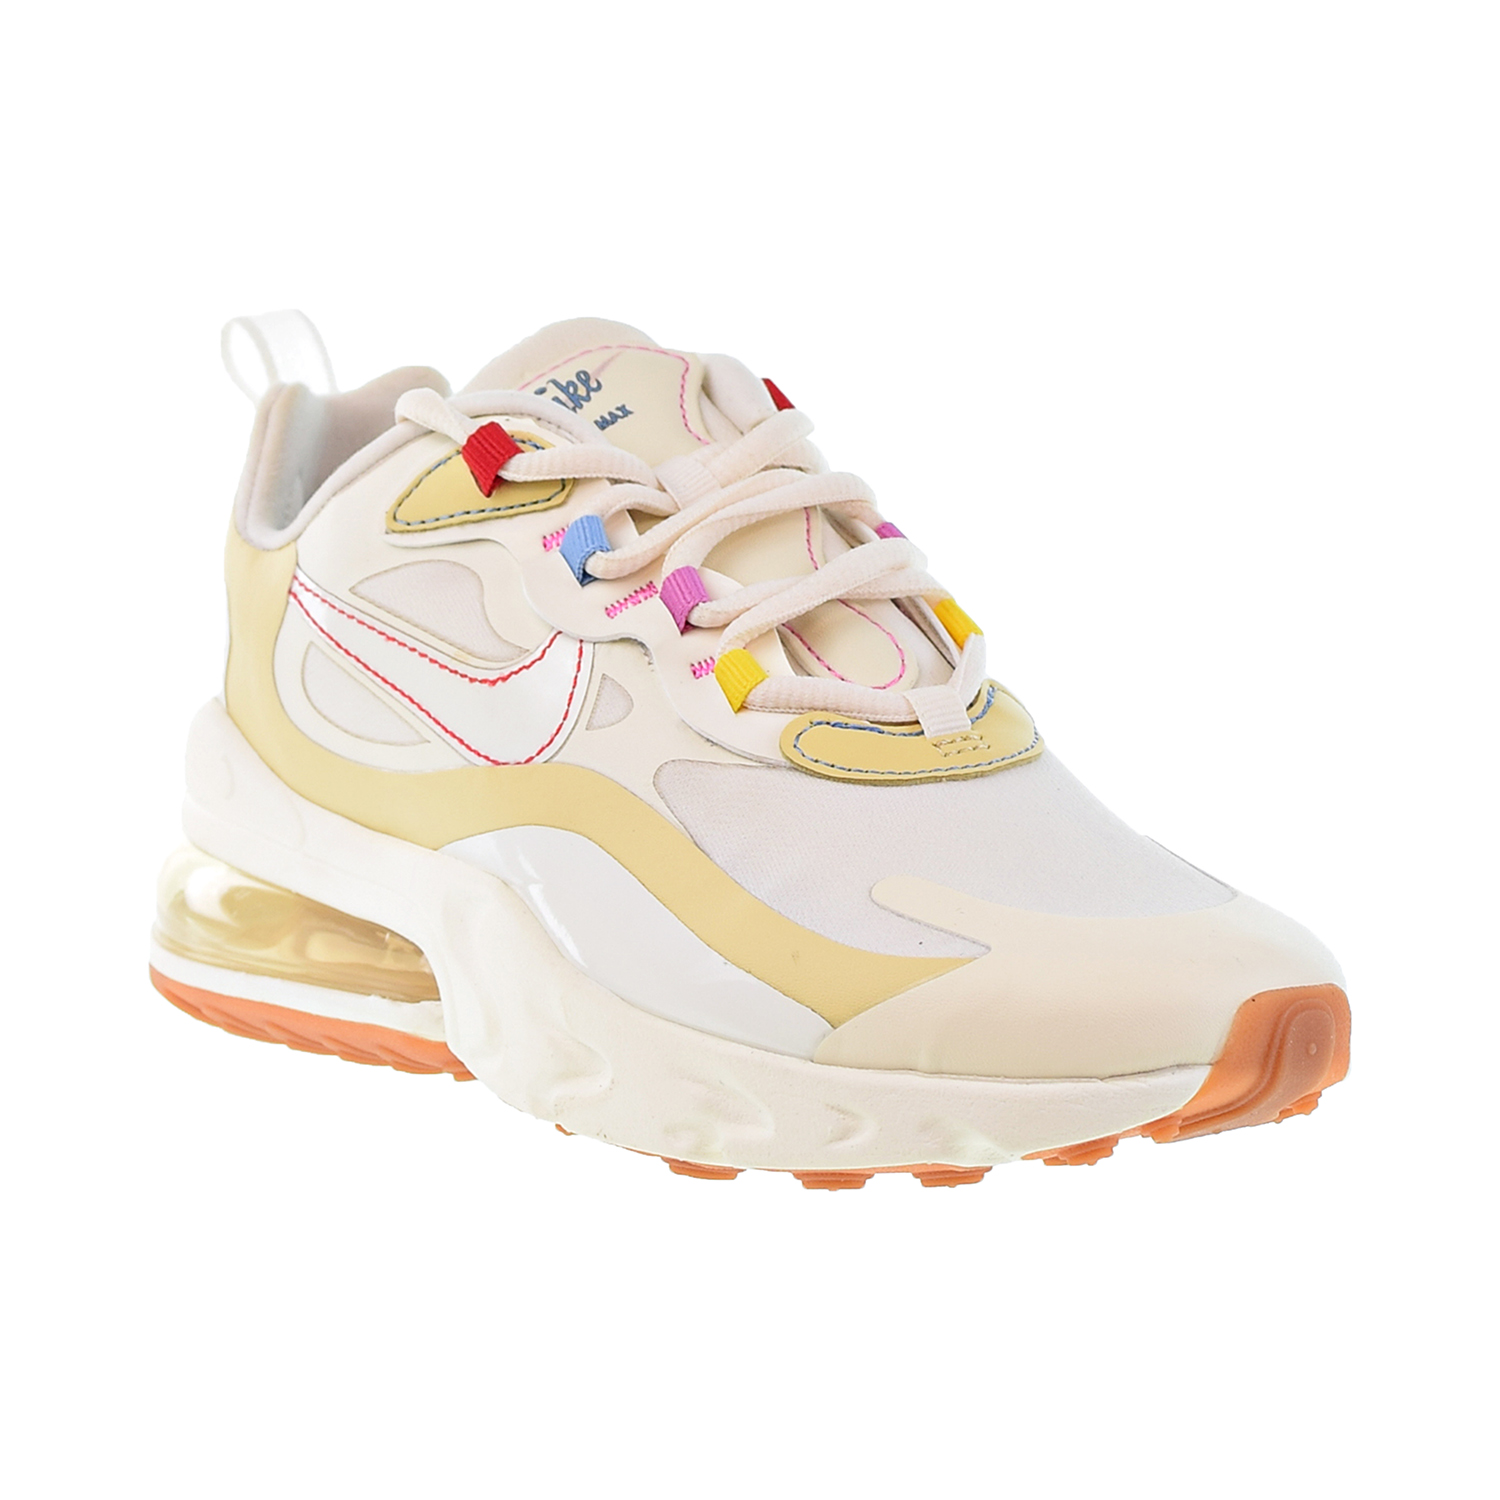 Nike Air Max 270 React Women's Shoes Pale Ivory-Sail-Pale Vanilla cq0208-101 - image 2 of 6